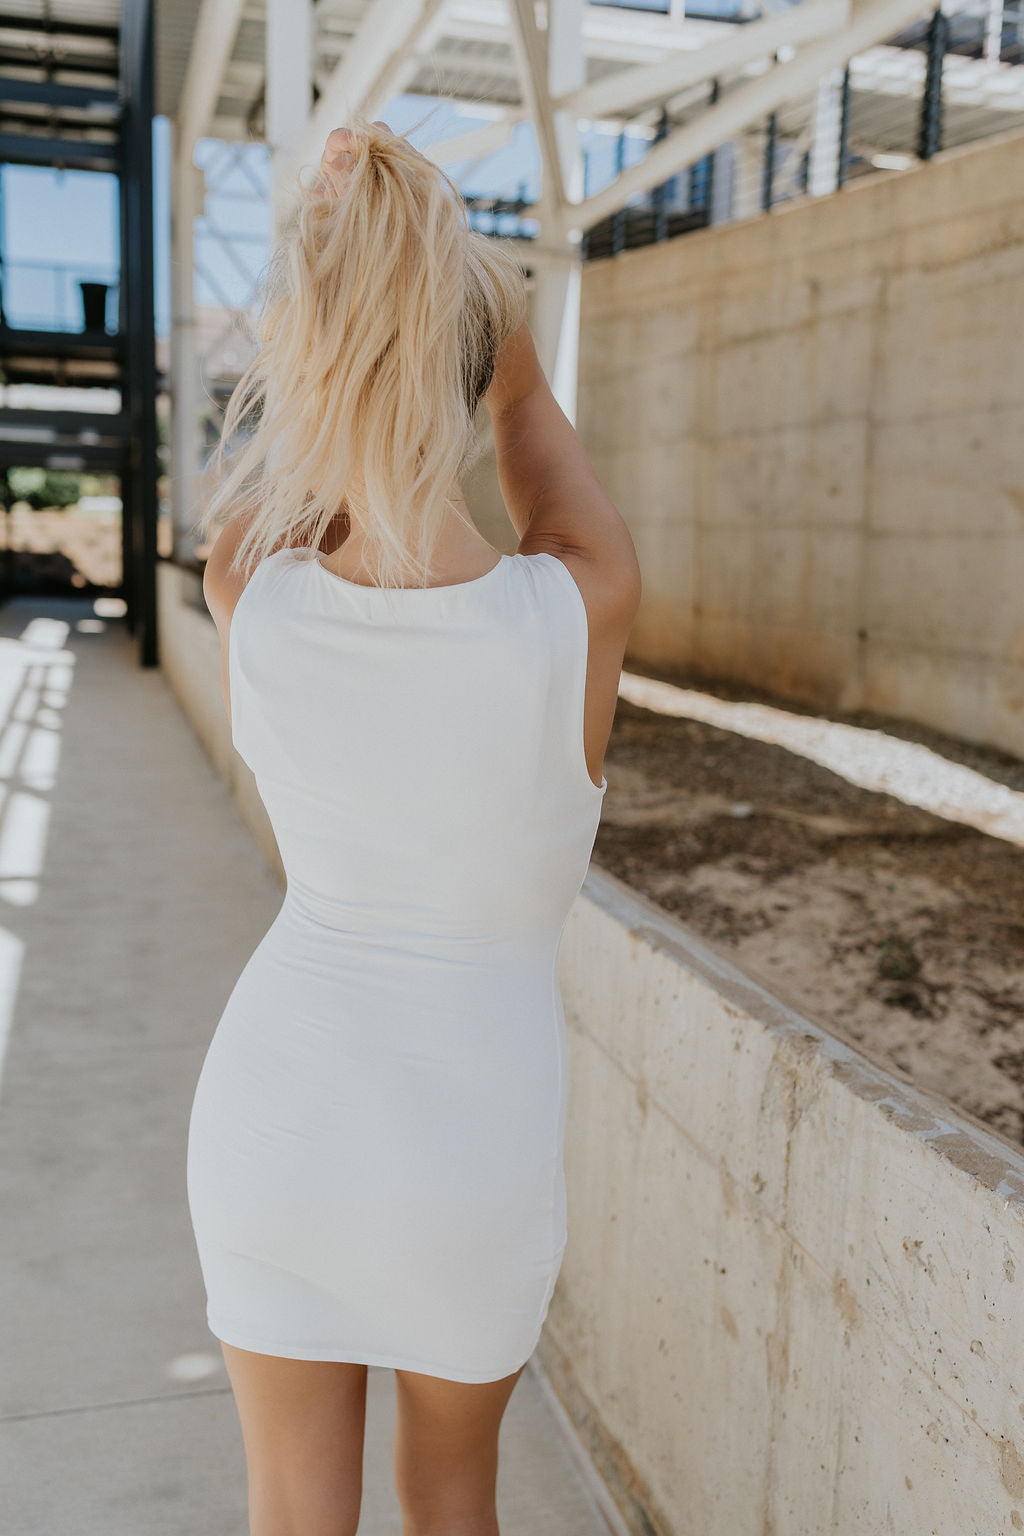 back view of female model wearing the Demi White & Black Bows Sleeveless Mini Dress which features White Lightweight Fabric, White Lining, Mini Length, Black Ribbon Bows Detail, Upper Cutout Details, Round Neckline and Sleeveless